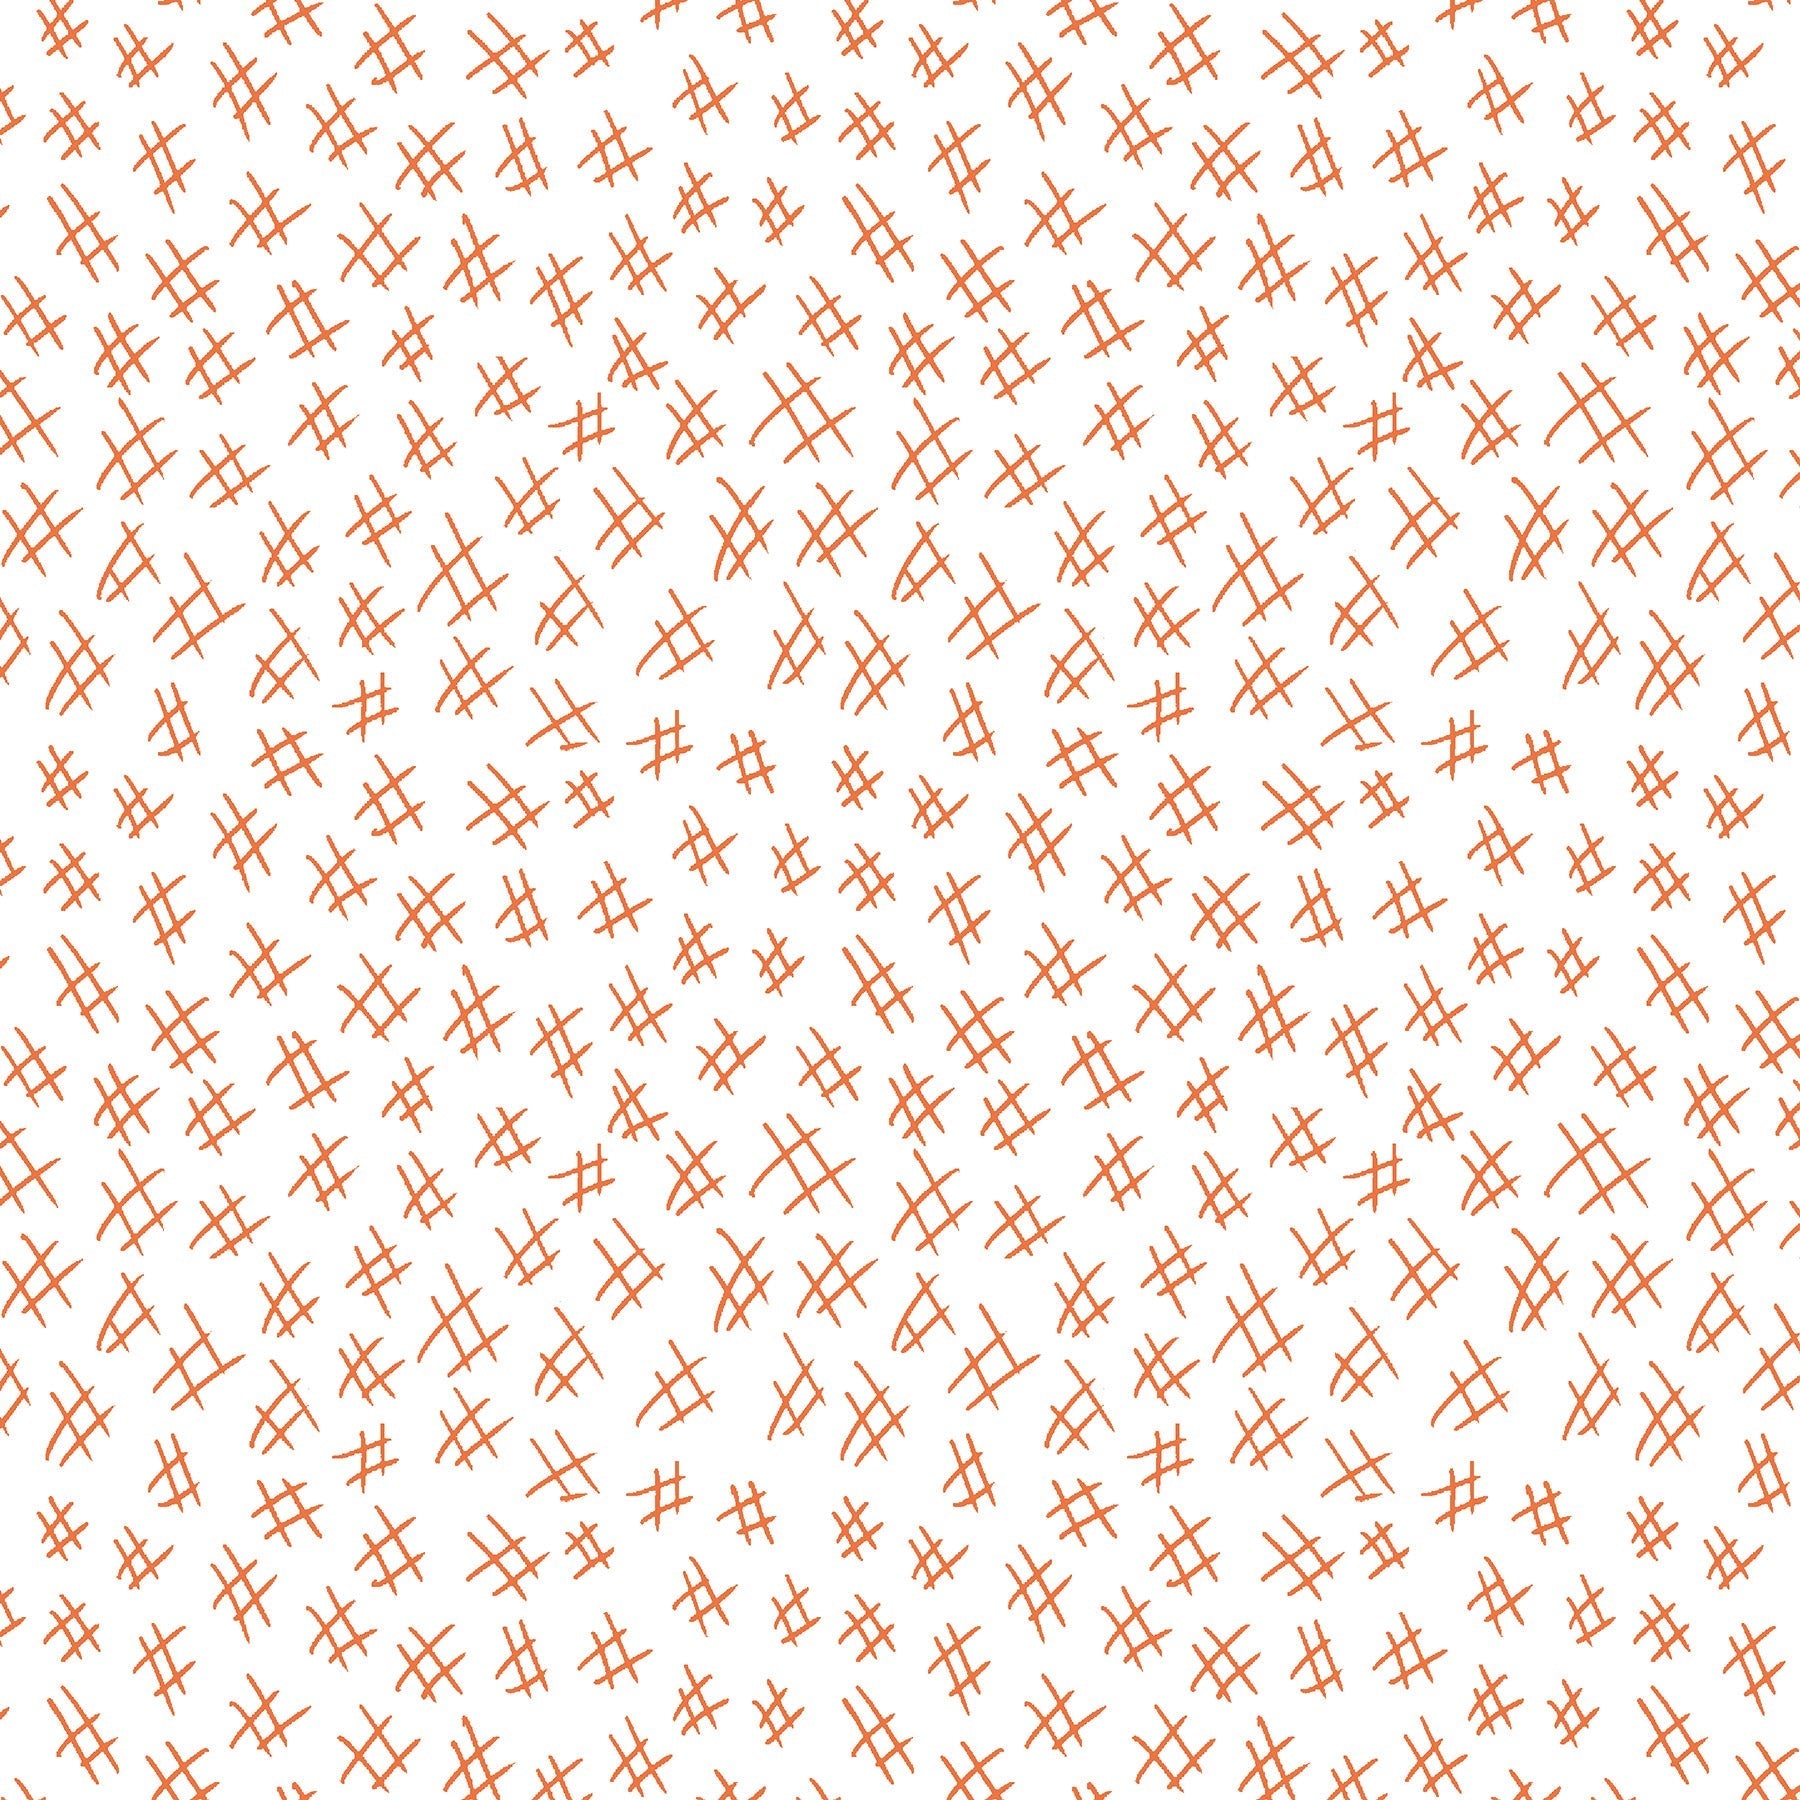  Hashtags in orange and white (13263-35)  is from Stitchy by Christa Watson for Benartex. The hashtags print features a white background with orange hashtags to provide a light tone for the collection and will serve well as a background fabric, a contrast fabric, or any where the eye needs to rest in your project.